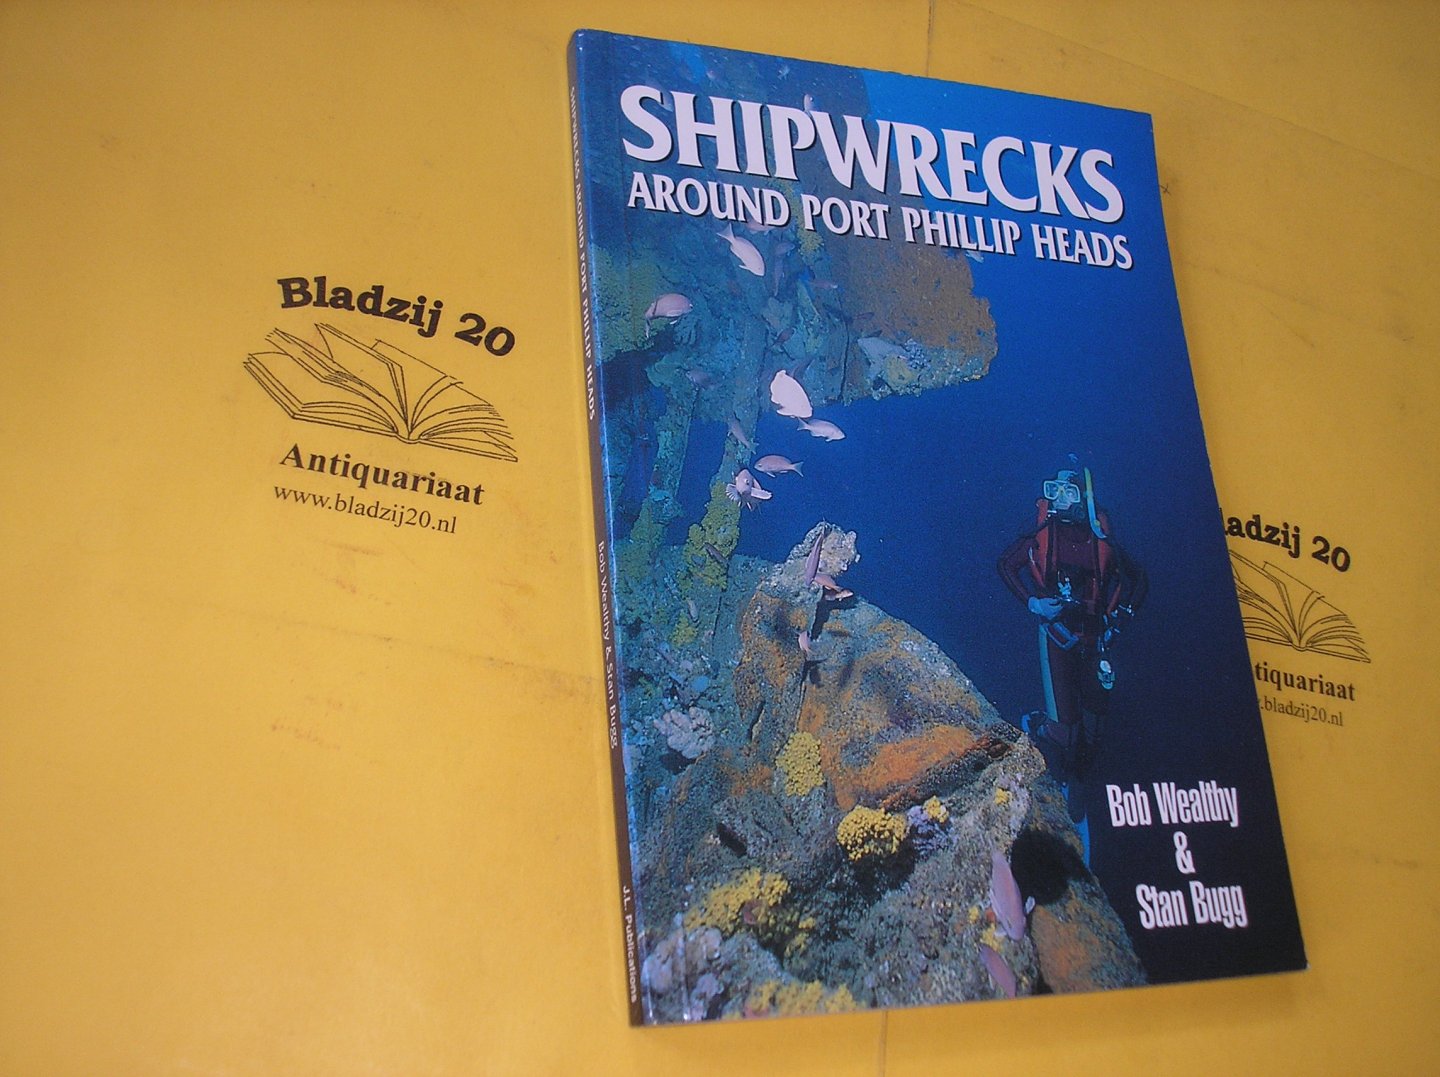 Wealthy, Bob and Bugg, Stan. - Shipwrecks around Port Phillip Heads. A comprehensive scuba divers guide to shipwrecks in and around the entrance to Victoria's Port Phillip Bay.